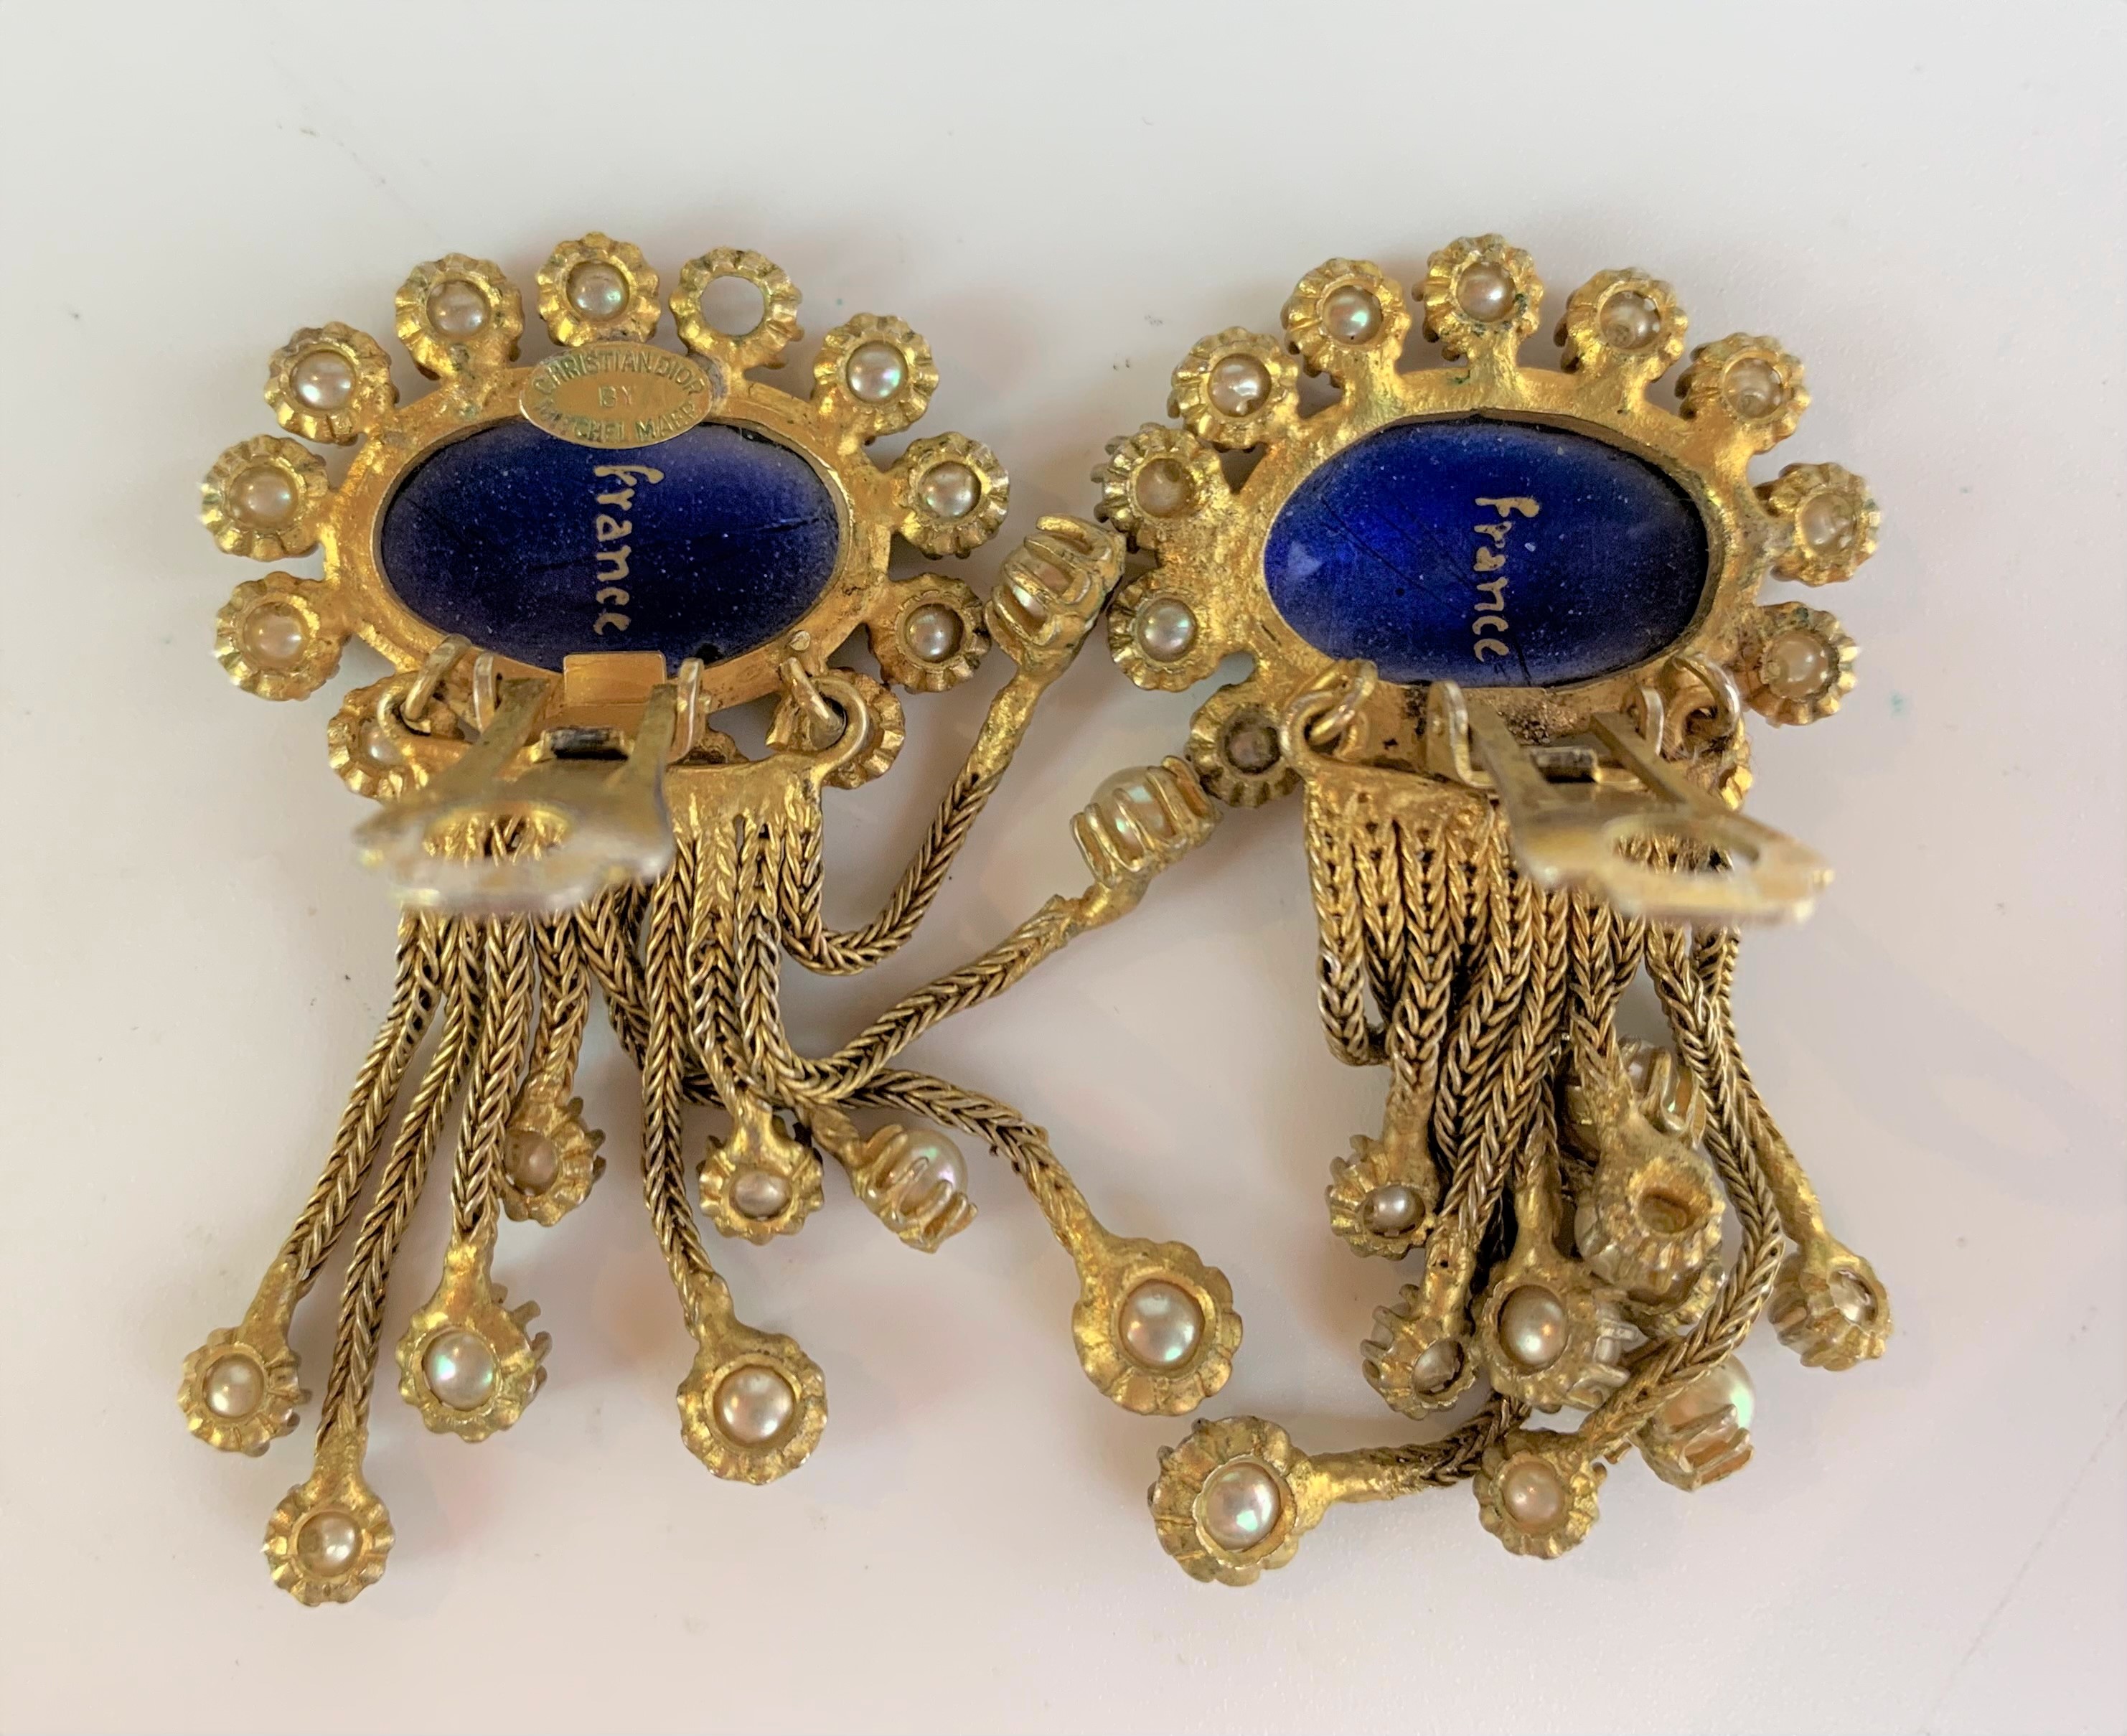 Pair of Christian Dior earrings by Michel Maer (1 pearl missing) - Image 5 of 6